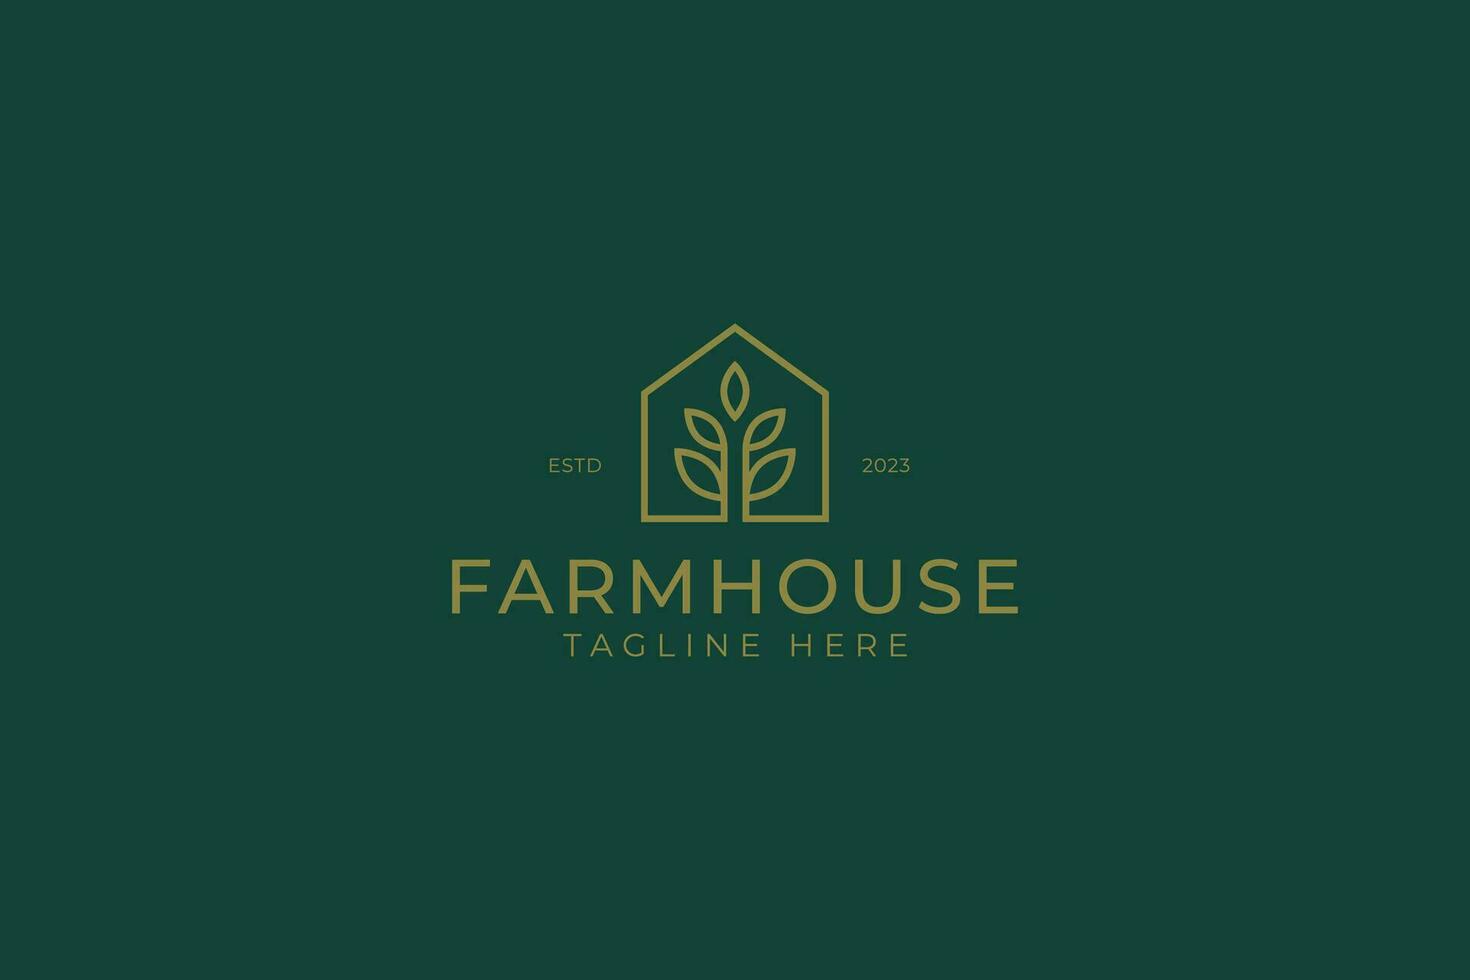 House Plant Farm Botany Agriculture Garden Nature Home Property Residential Concept Building Logo vector